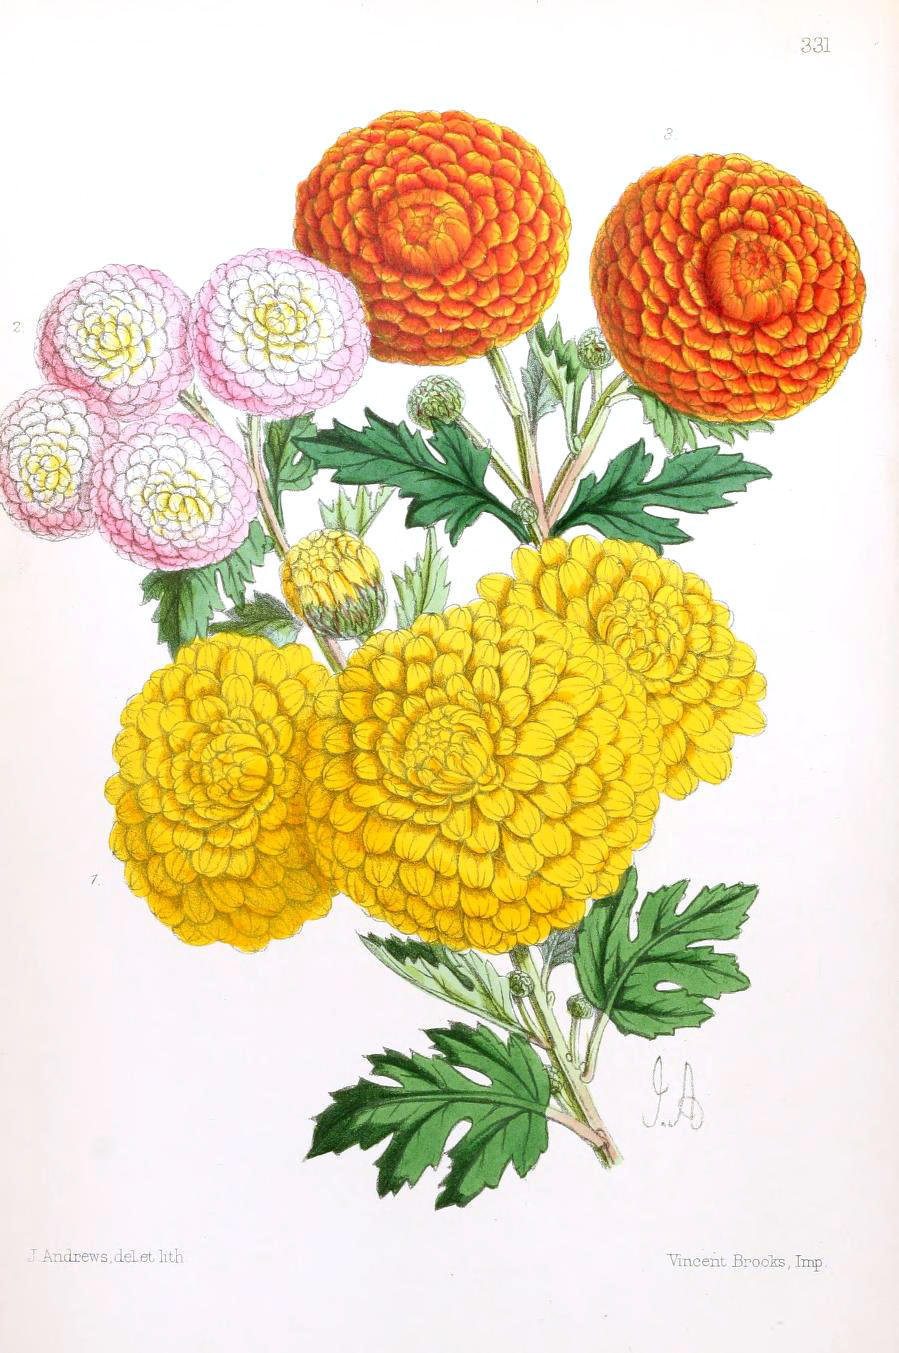 Vintage Botanical Prints - 65 in a series - Pompon Ciirysantheimuims from The Floral magazine; comprising figures and descriptions of popular garden flowers (1867)